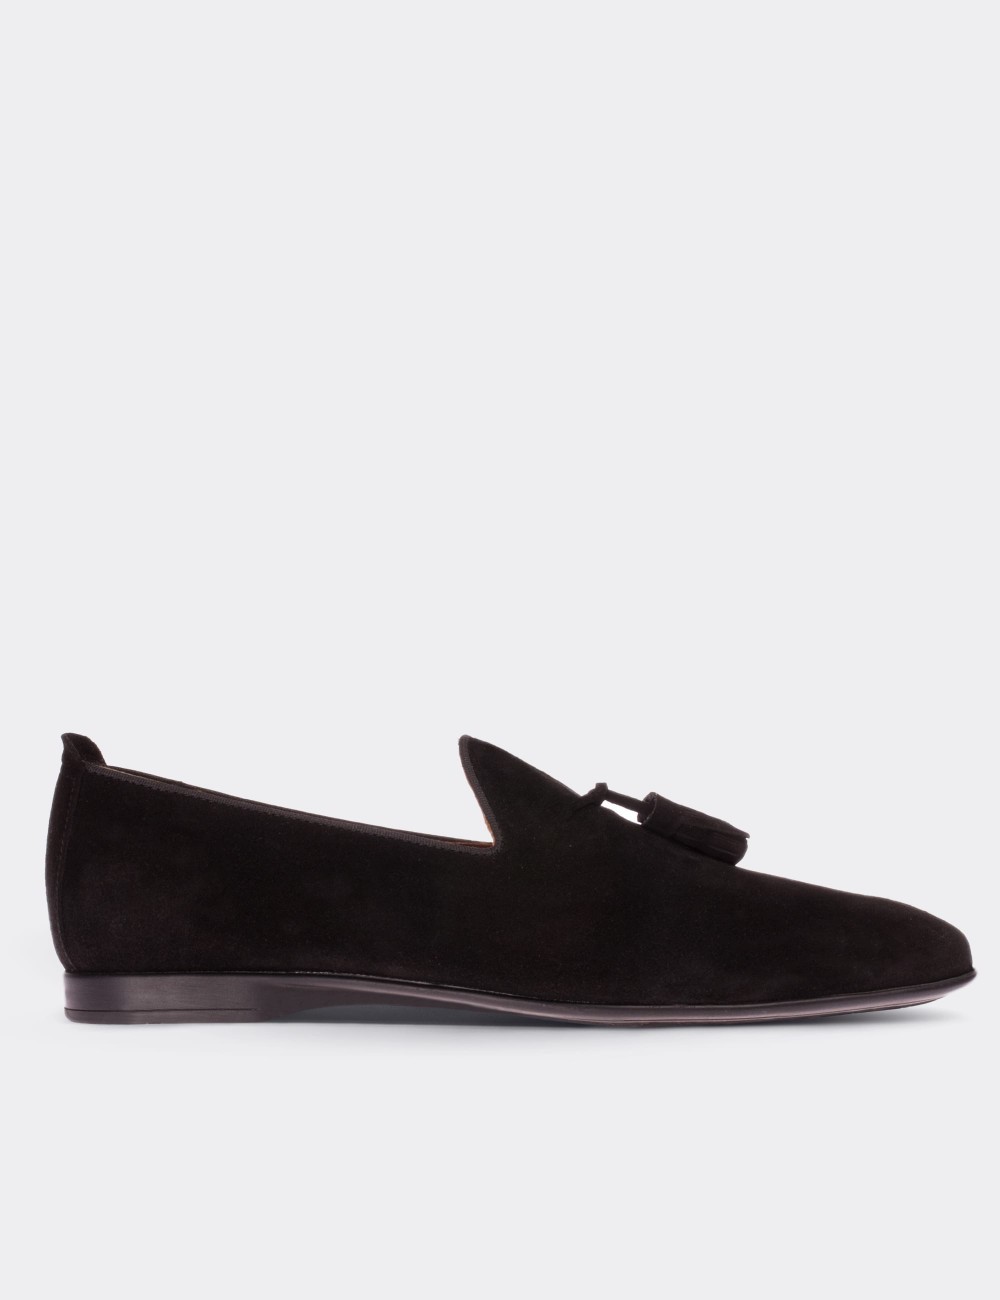 Black Suede Leather Loafers - 01702MSYHC02